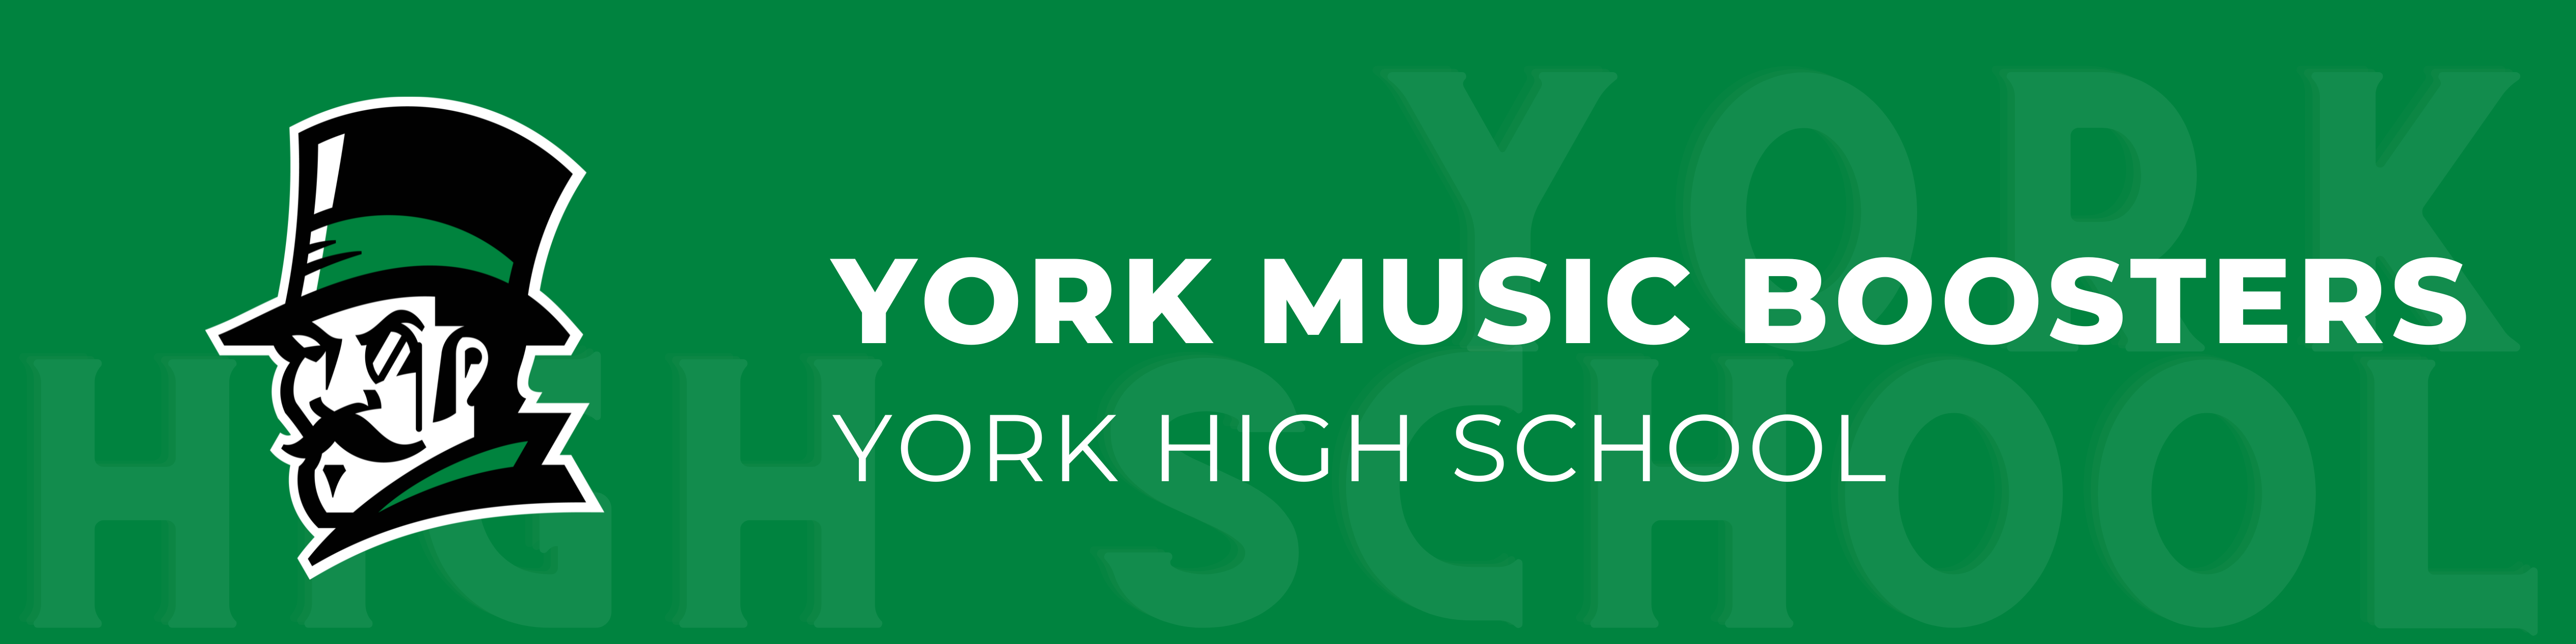 York Music Boosters